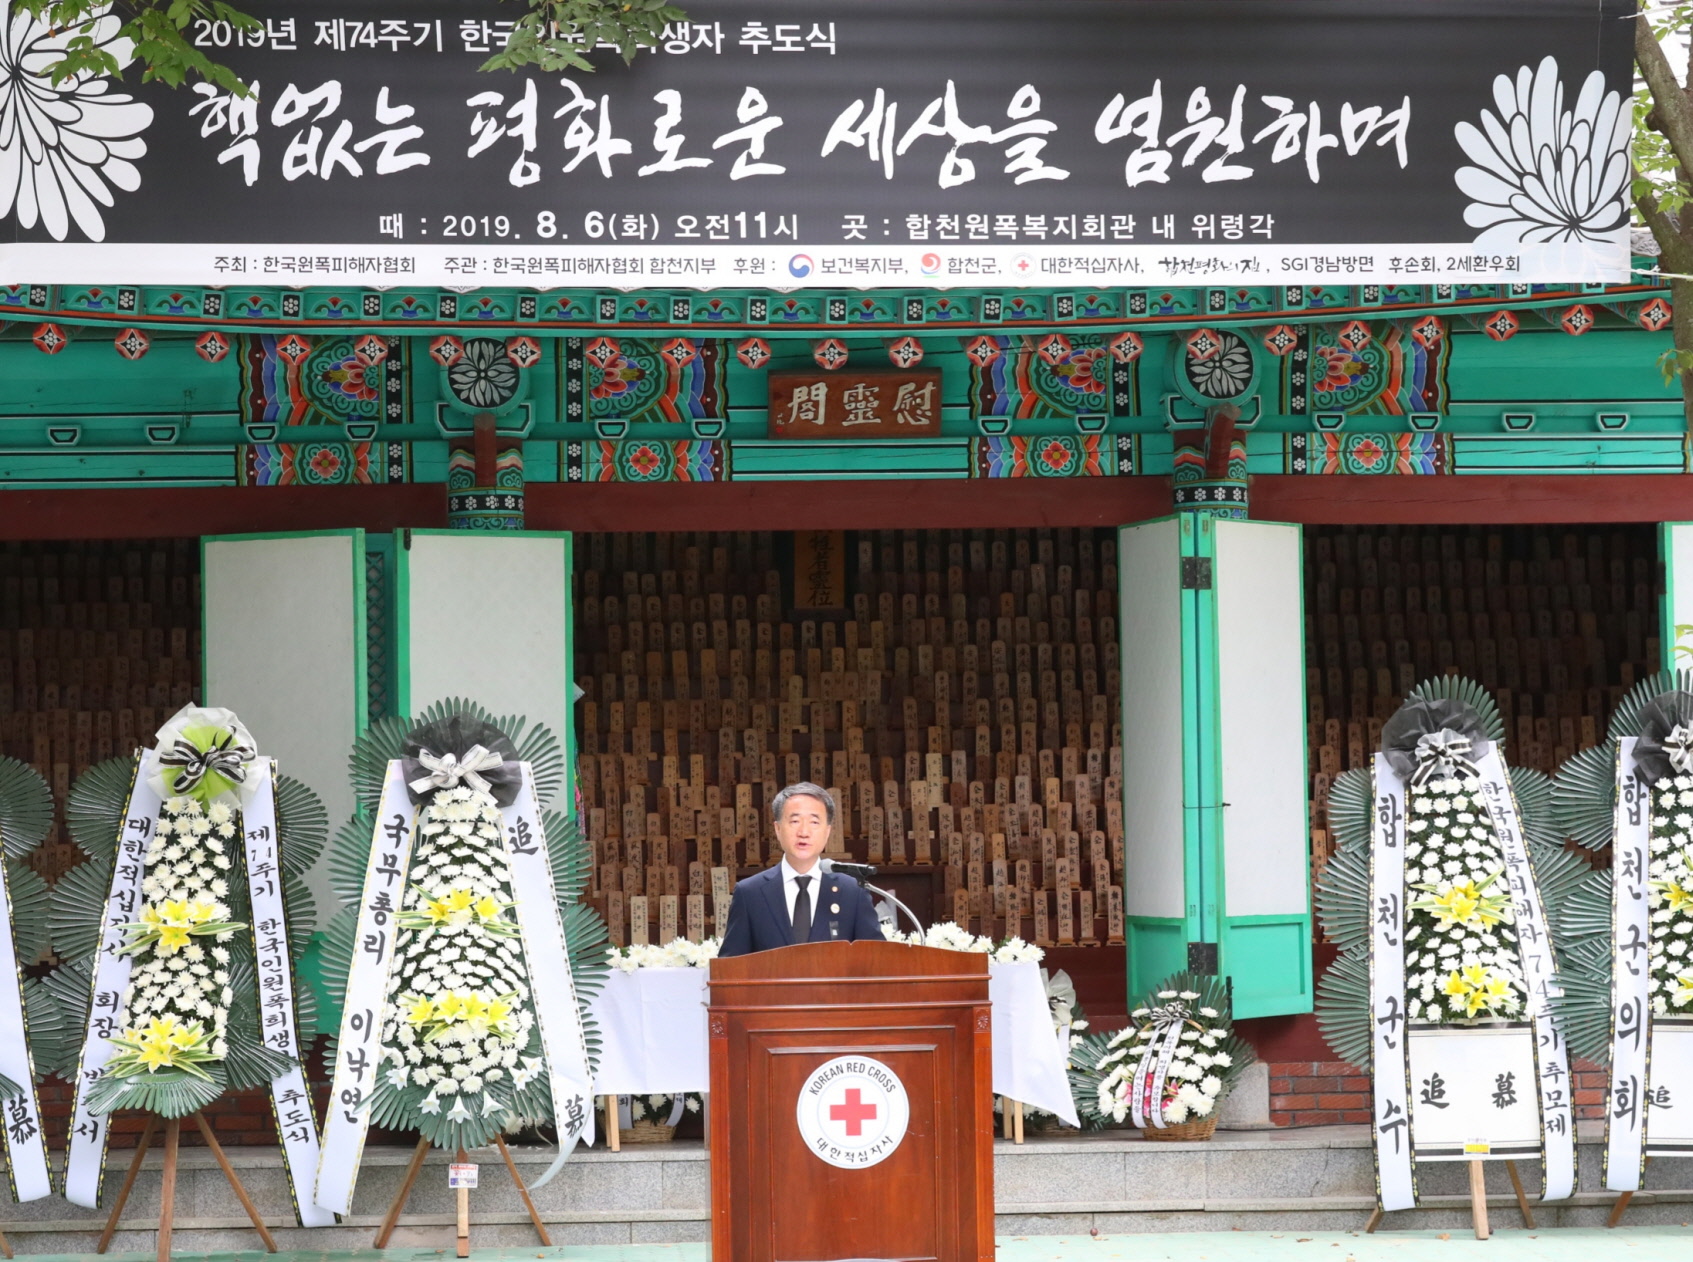 Minister Park Attends 74th Memorial Service for Korean Atomic Bomb Victims 사진13